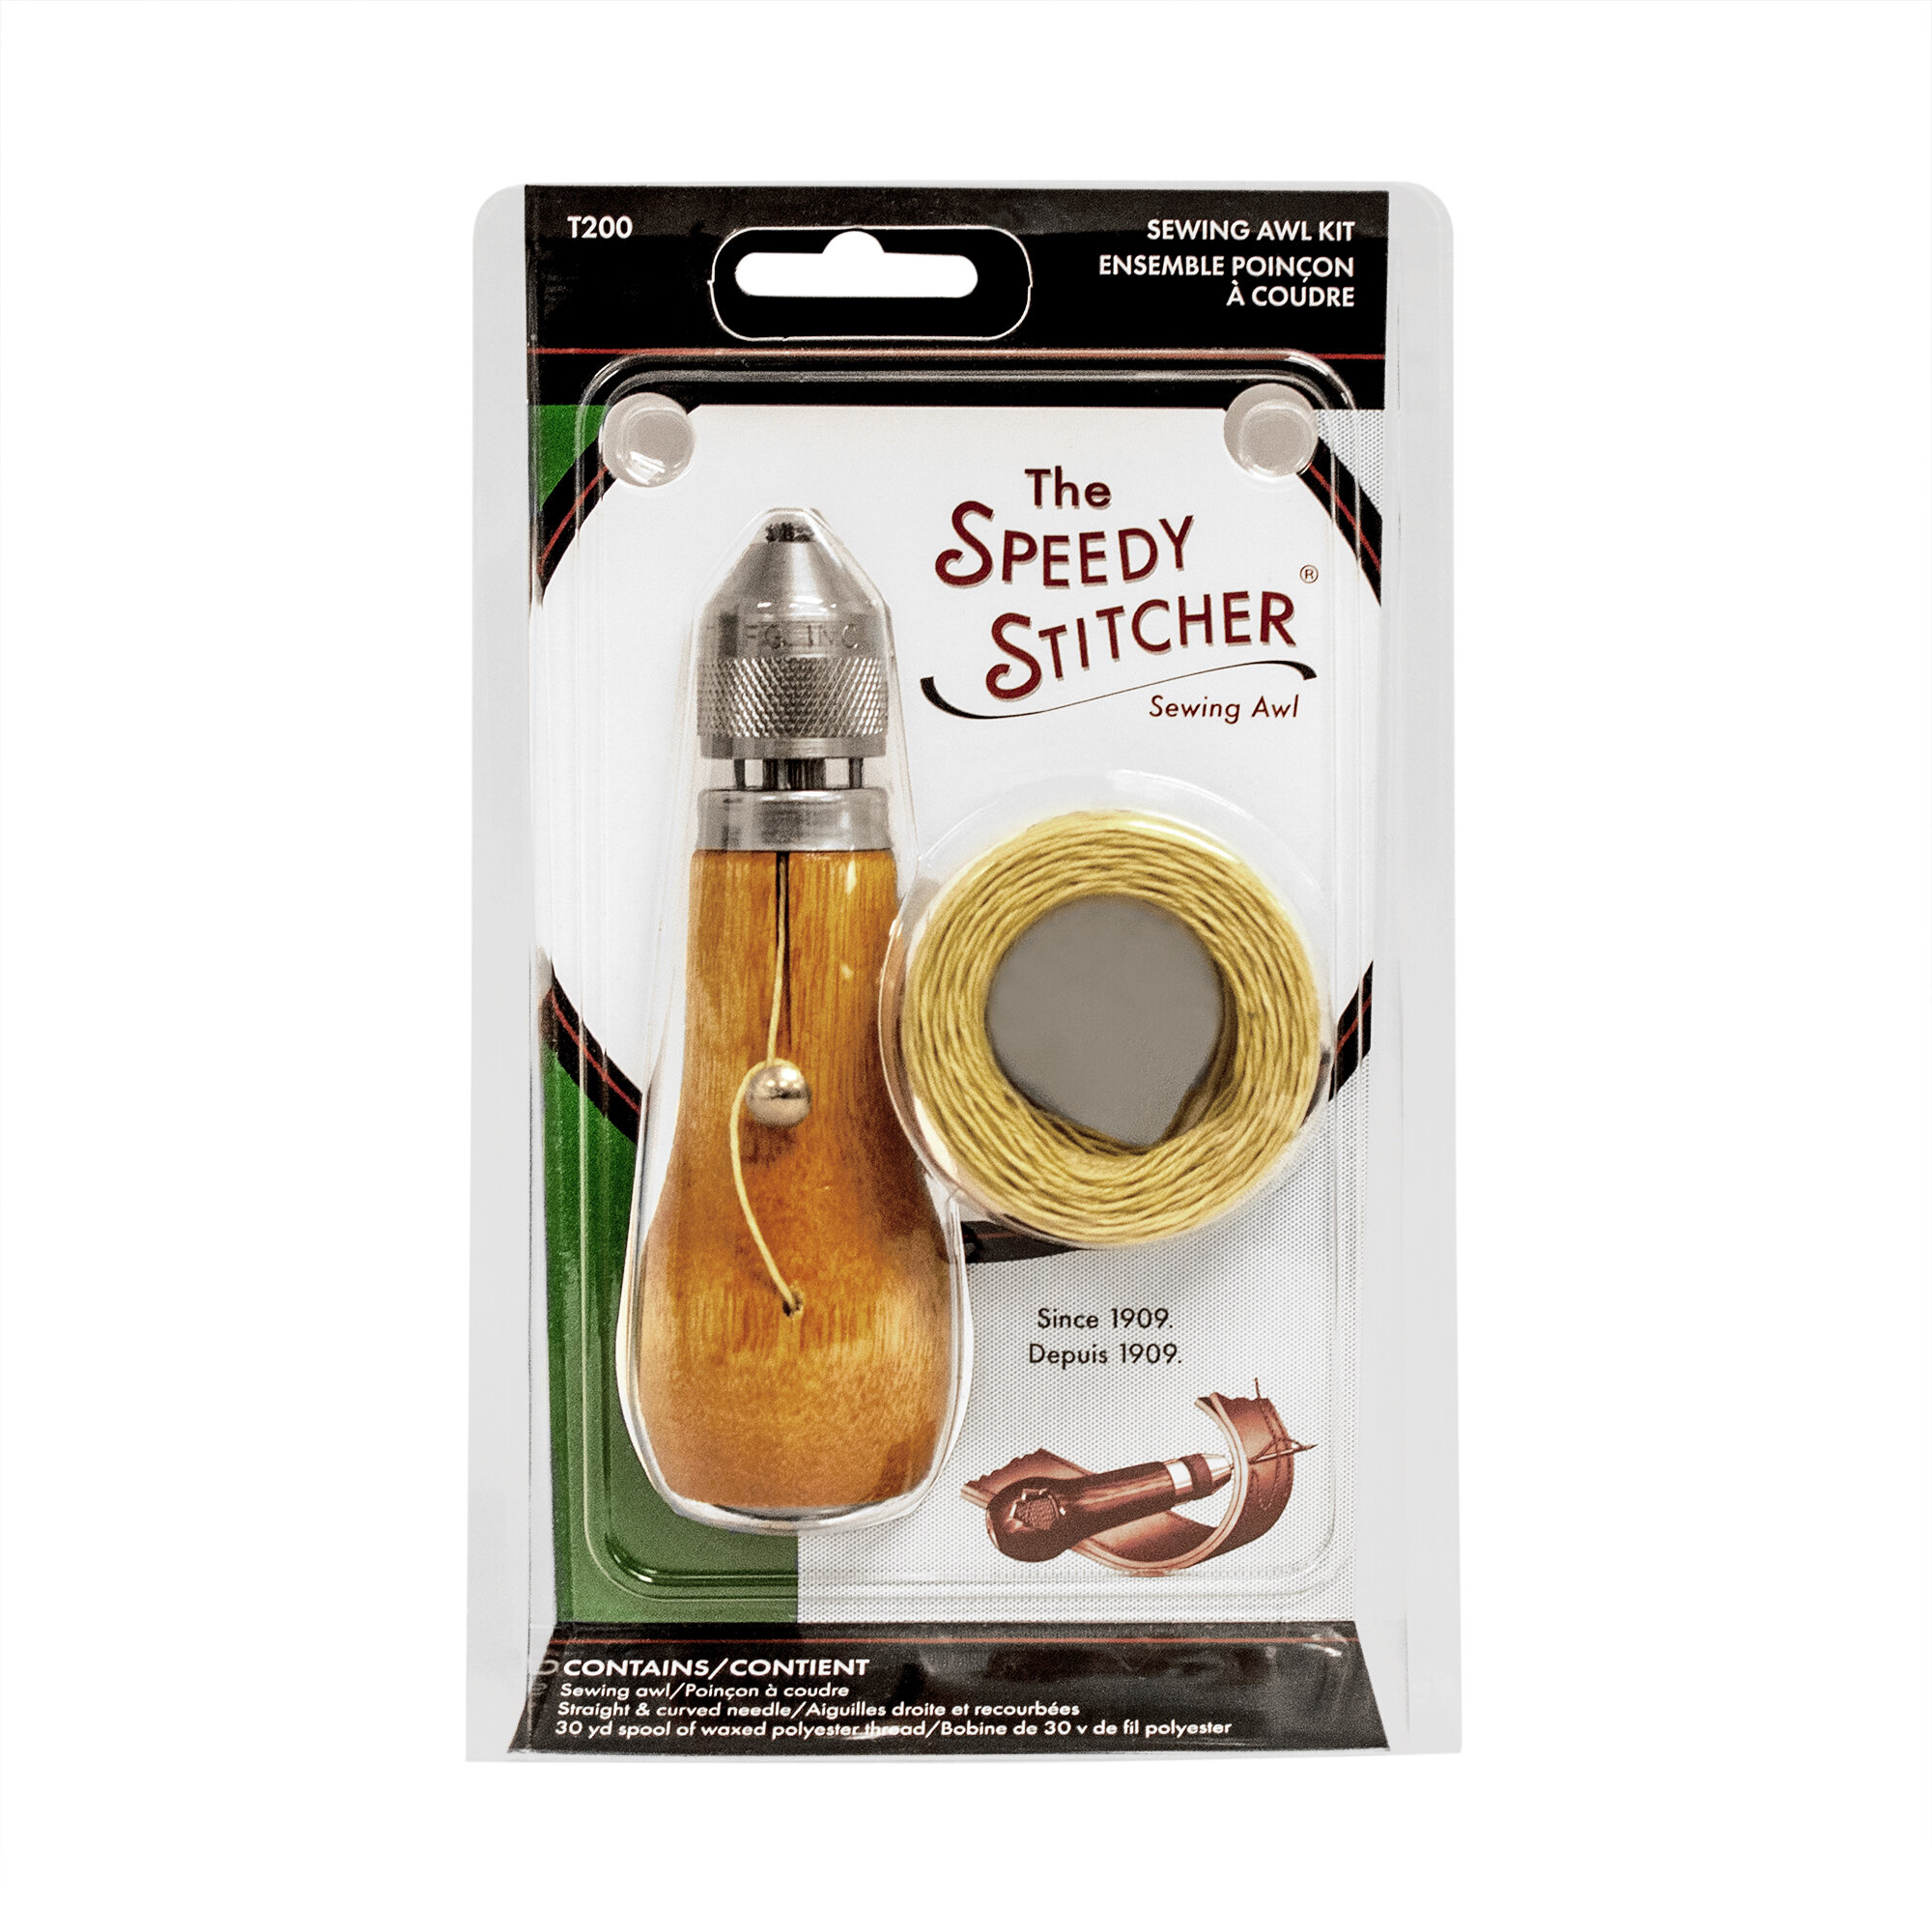  Speedy Stitcher Sewing Awl, One Color, One Size (SEW120), RED :  Arts, Crafts & Sewing